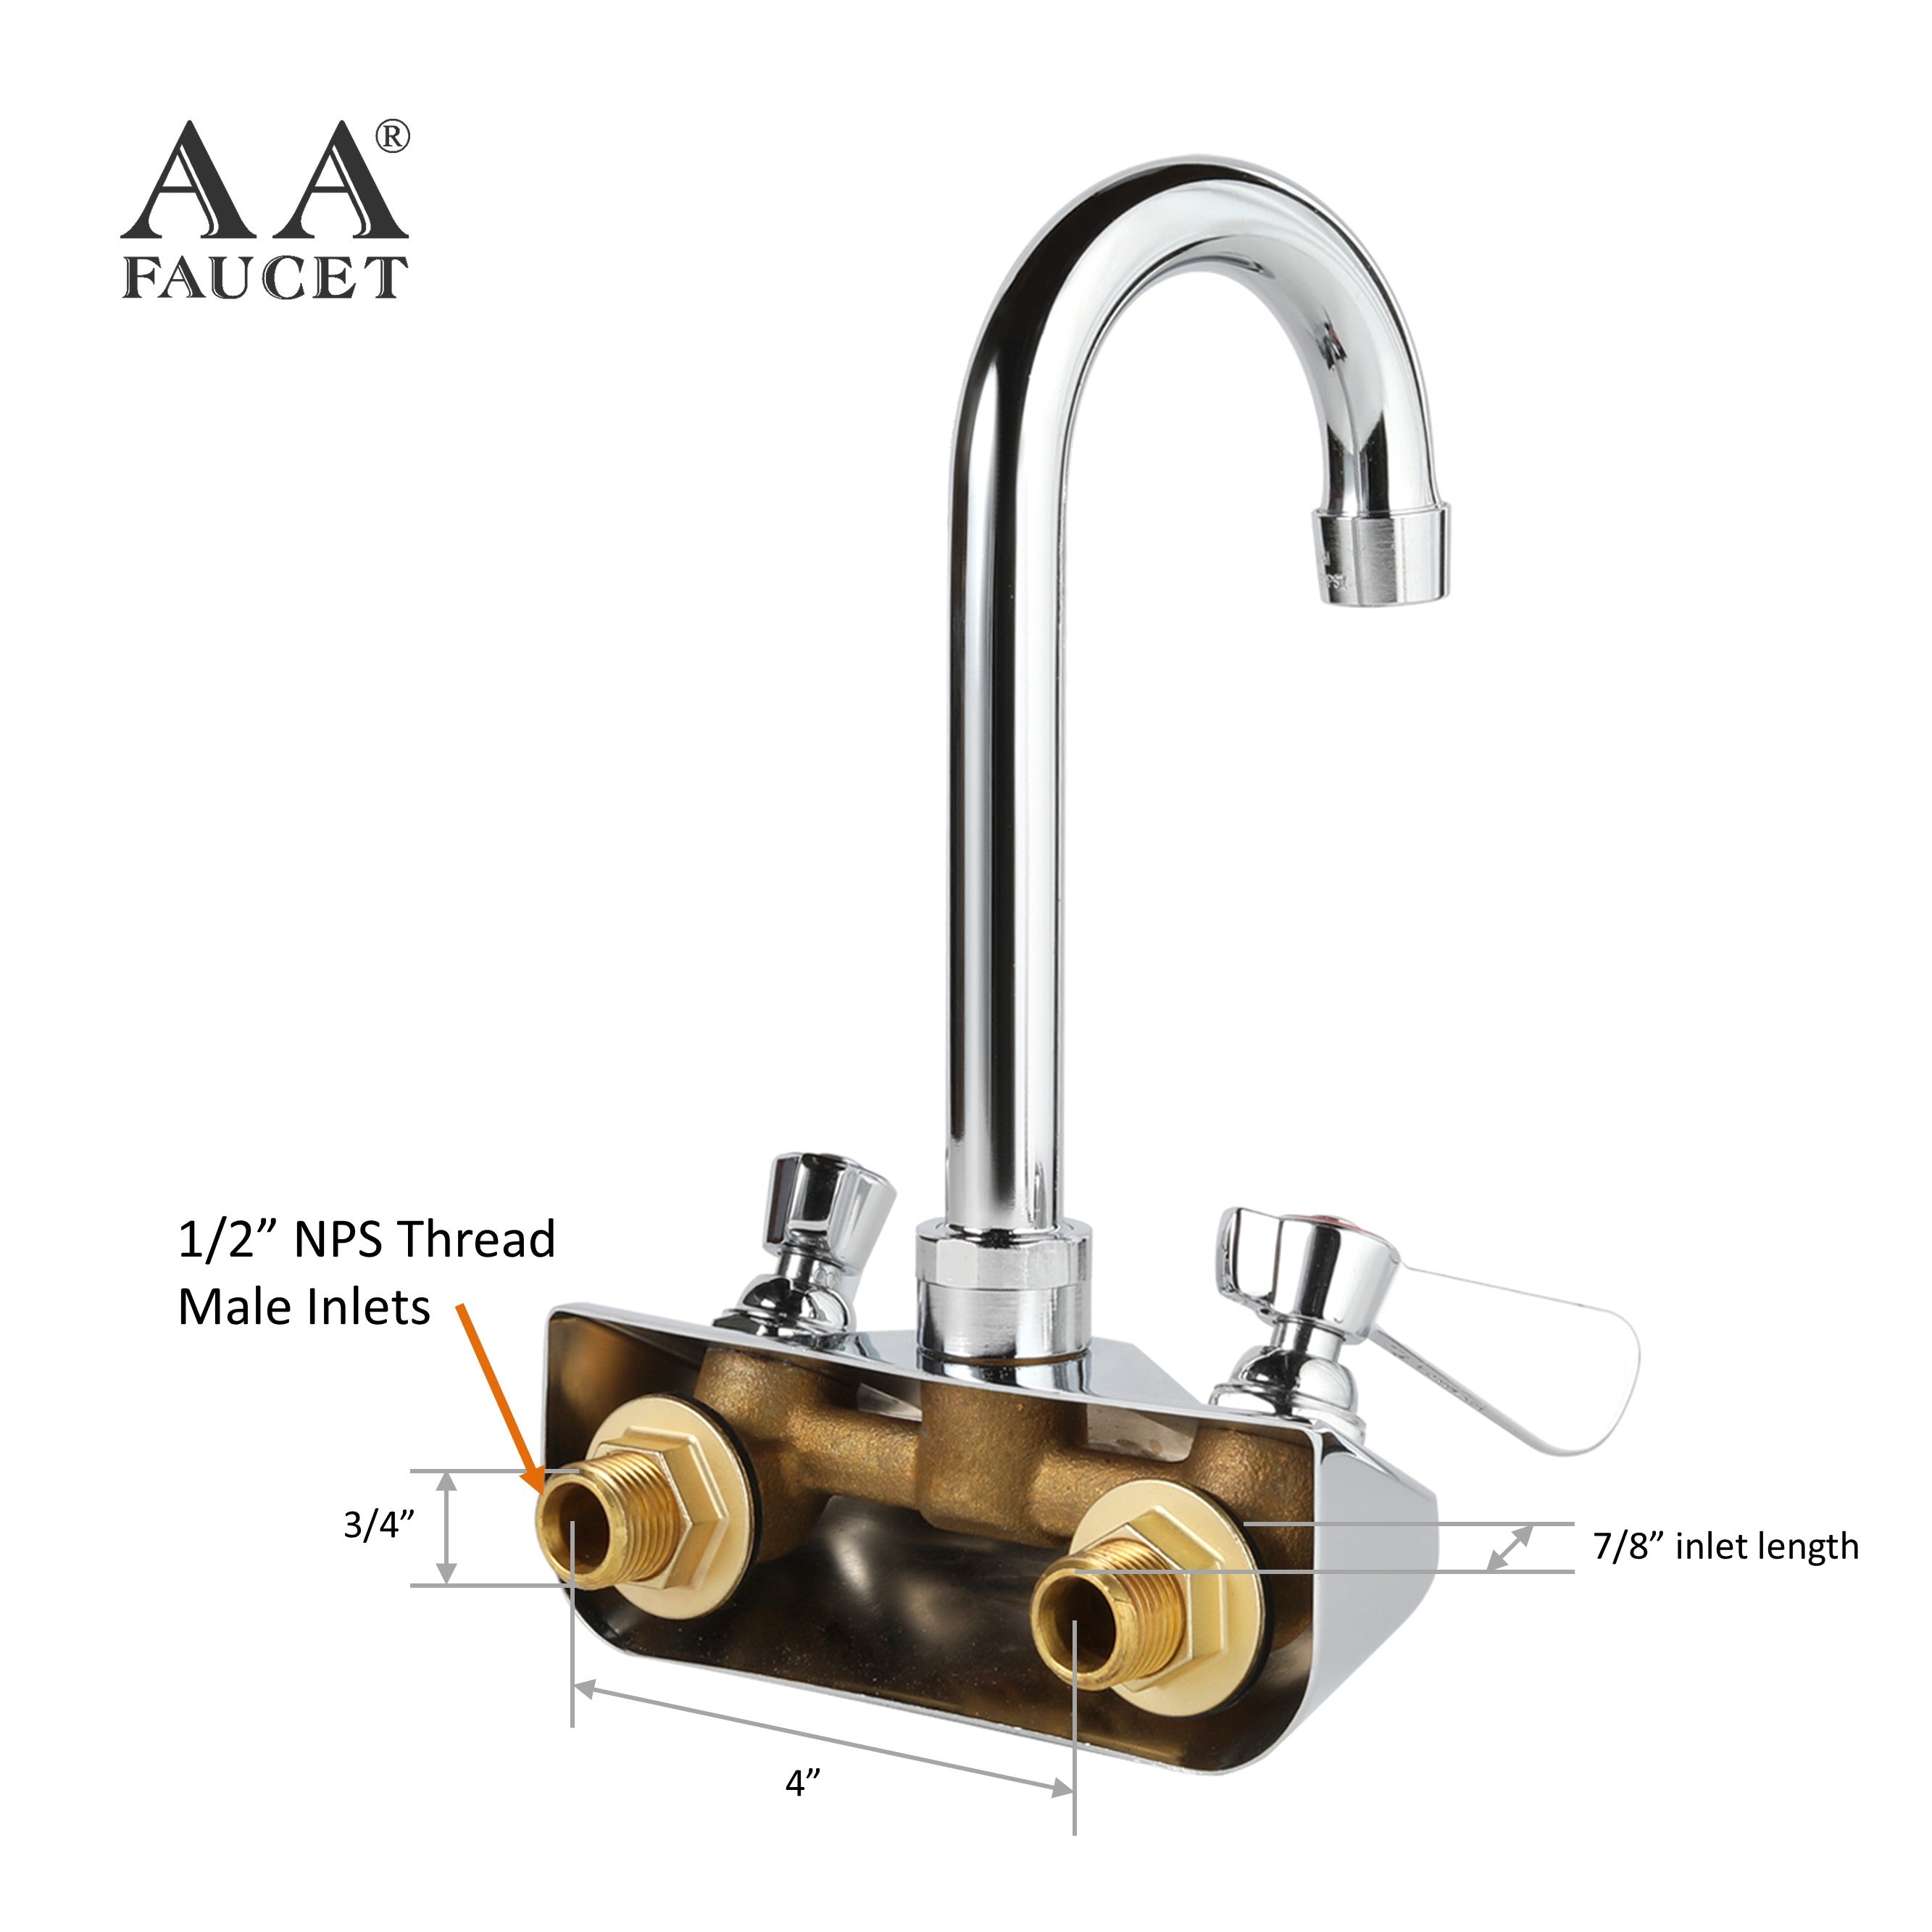 AA Faucet 4" Wall Mount Commercial Hand Sink Faucet with 3-1/2" Gooseneck Spout, Brass Construction Chrome Polished for Restaurant Kitchen NSF Approved